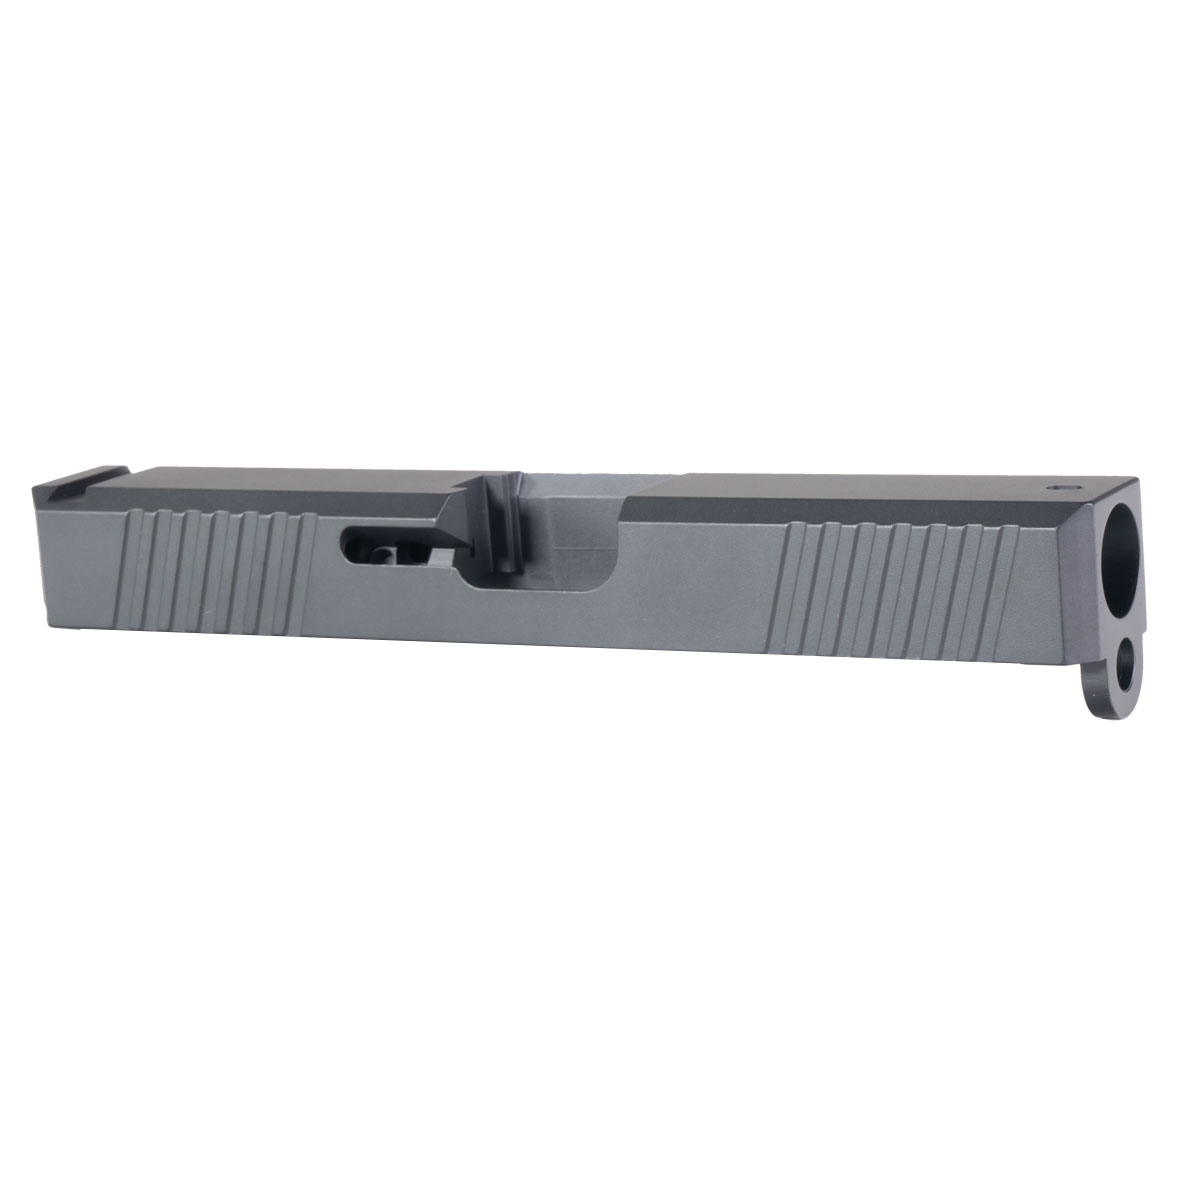 Live Free Armory Chamfered Pistol Slide w/Front Serrations, Compatible with Glock19 Gen 3, (No Optic Cut) Black Cerakote